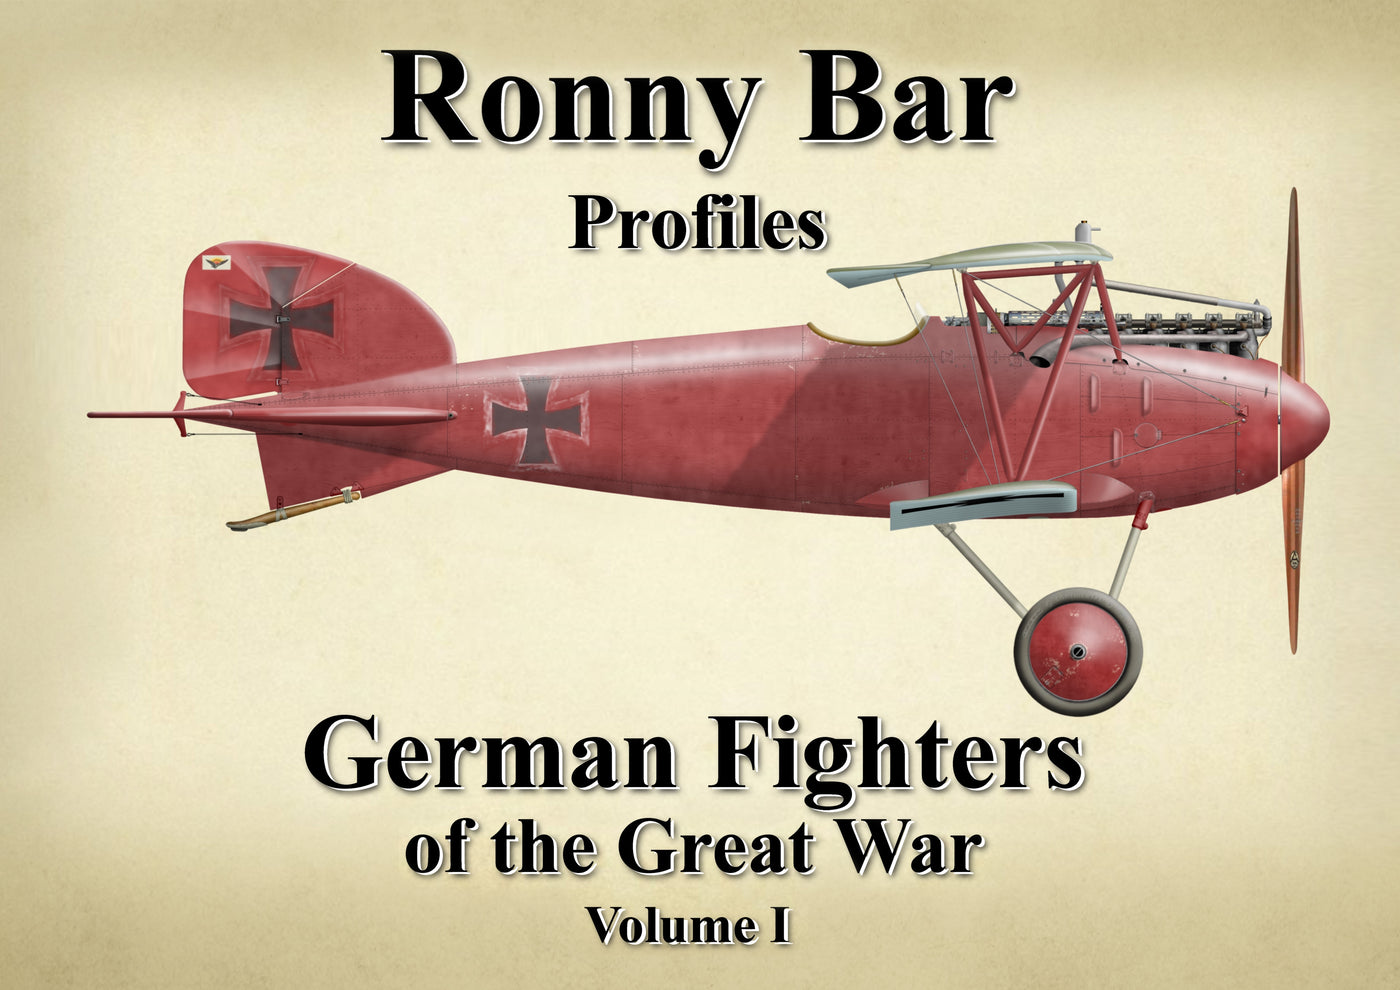 Ronny Bar Profiles - German Fighters of the Great War Vol 1